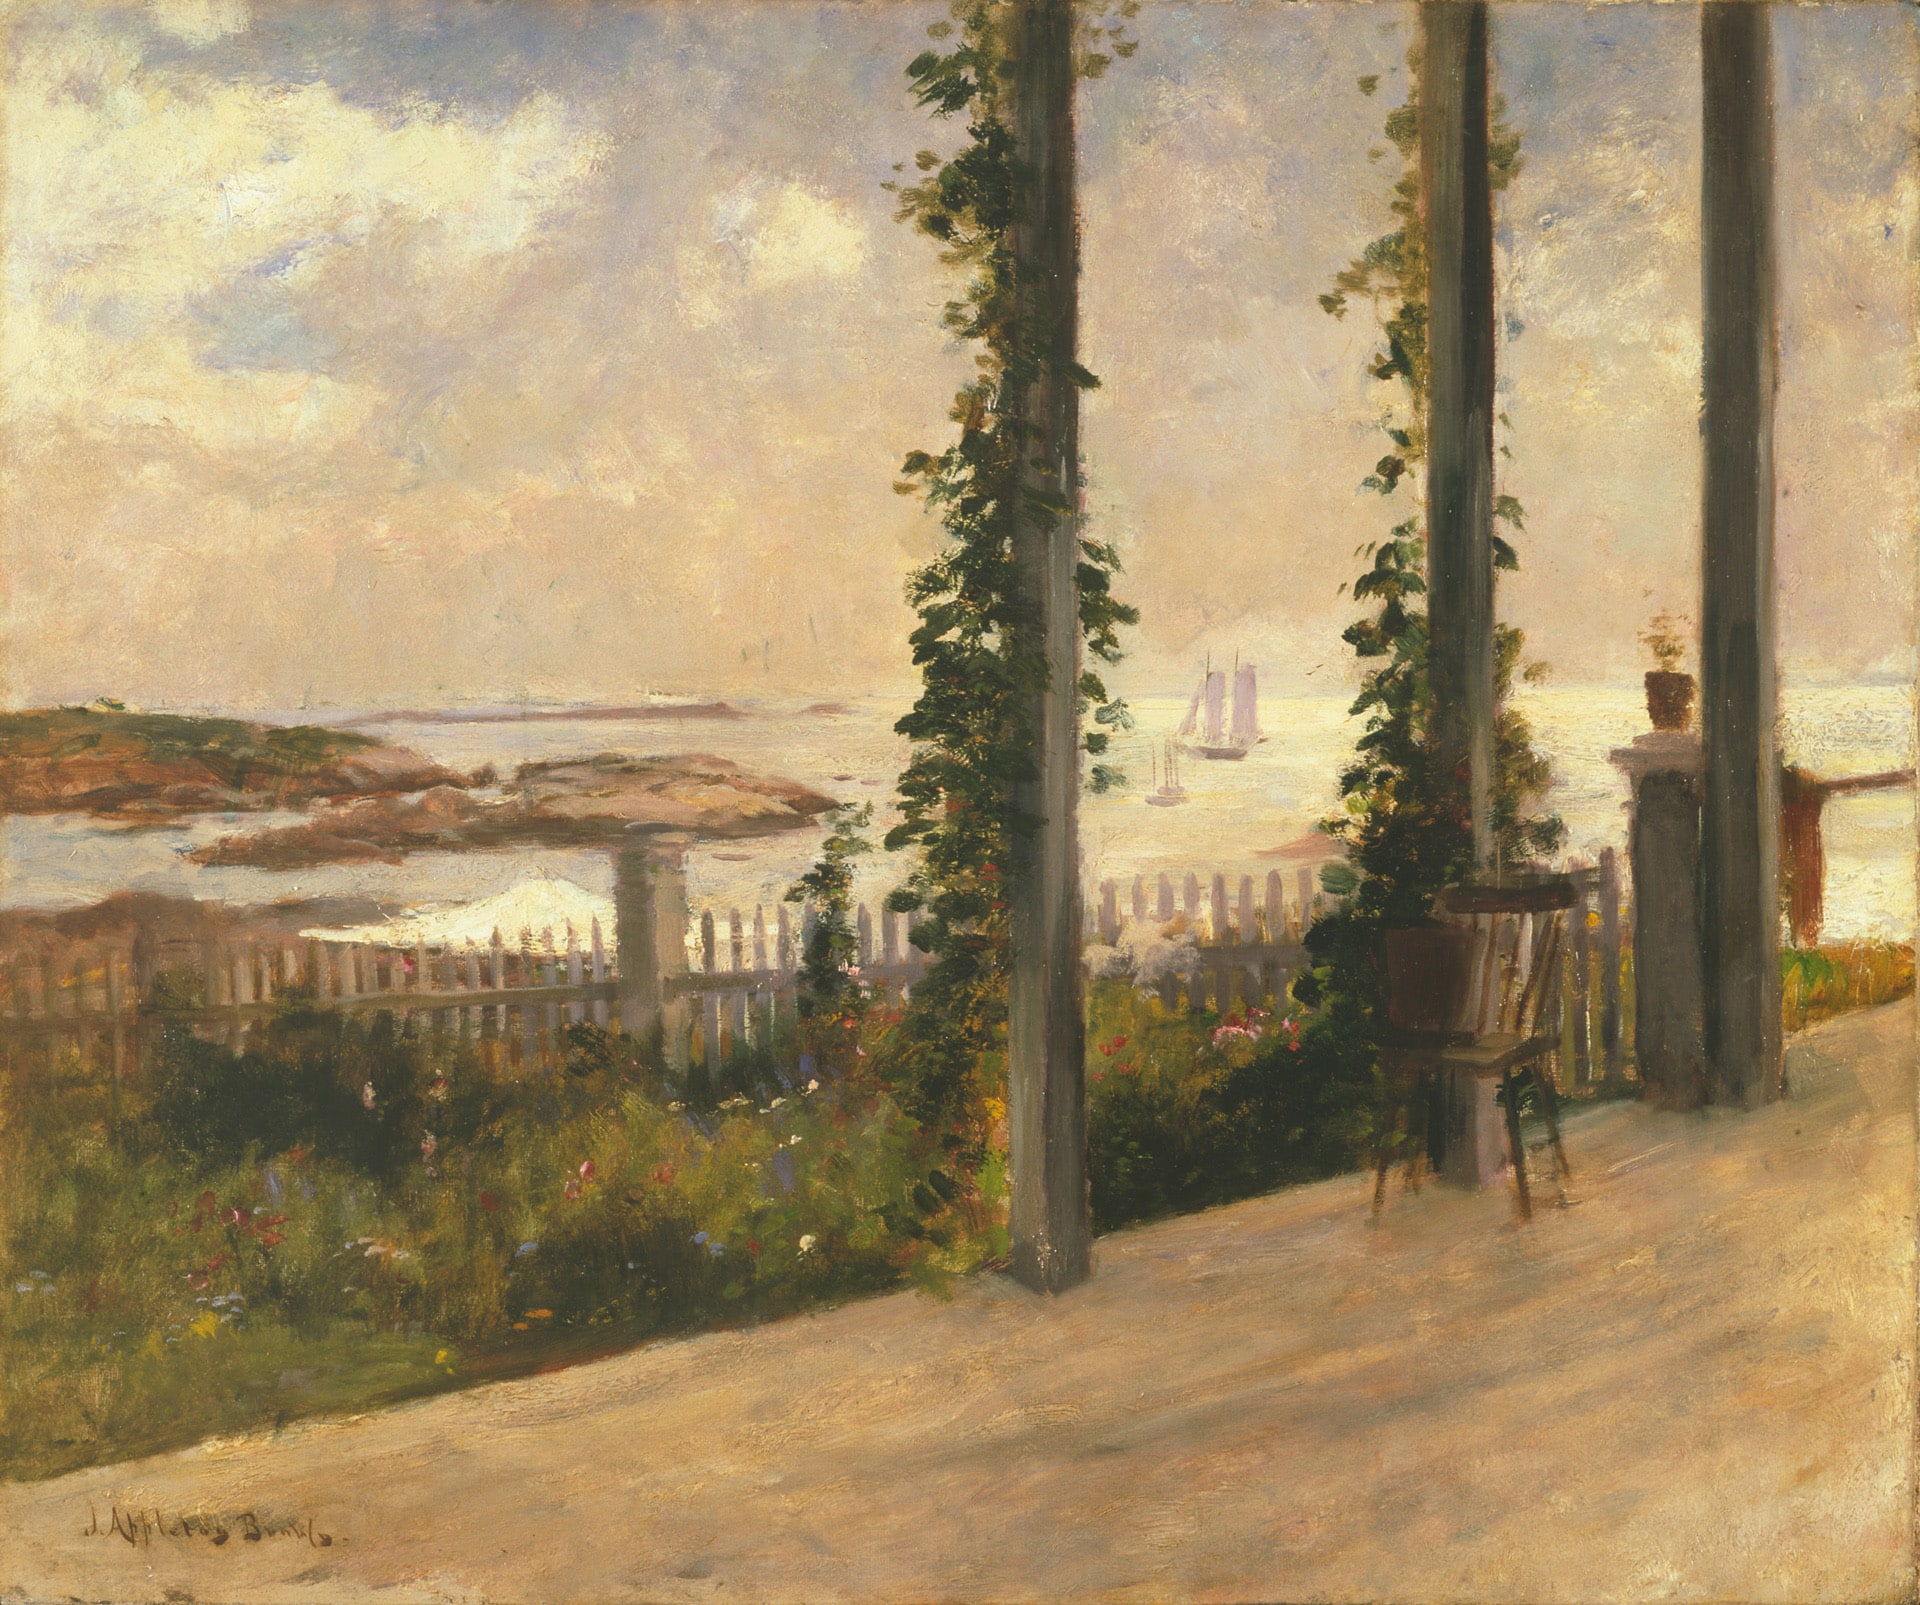 a landscape looking out from a porch onto the ocean with islands